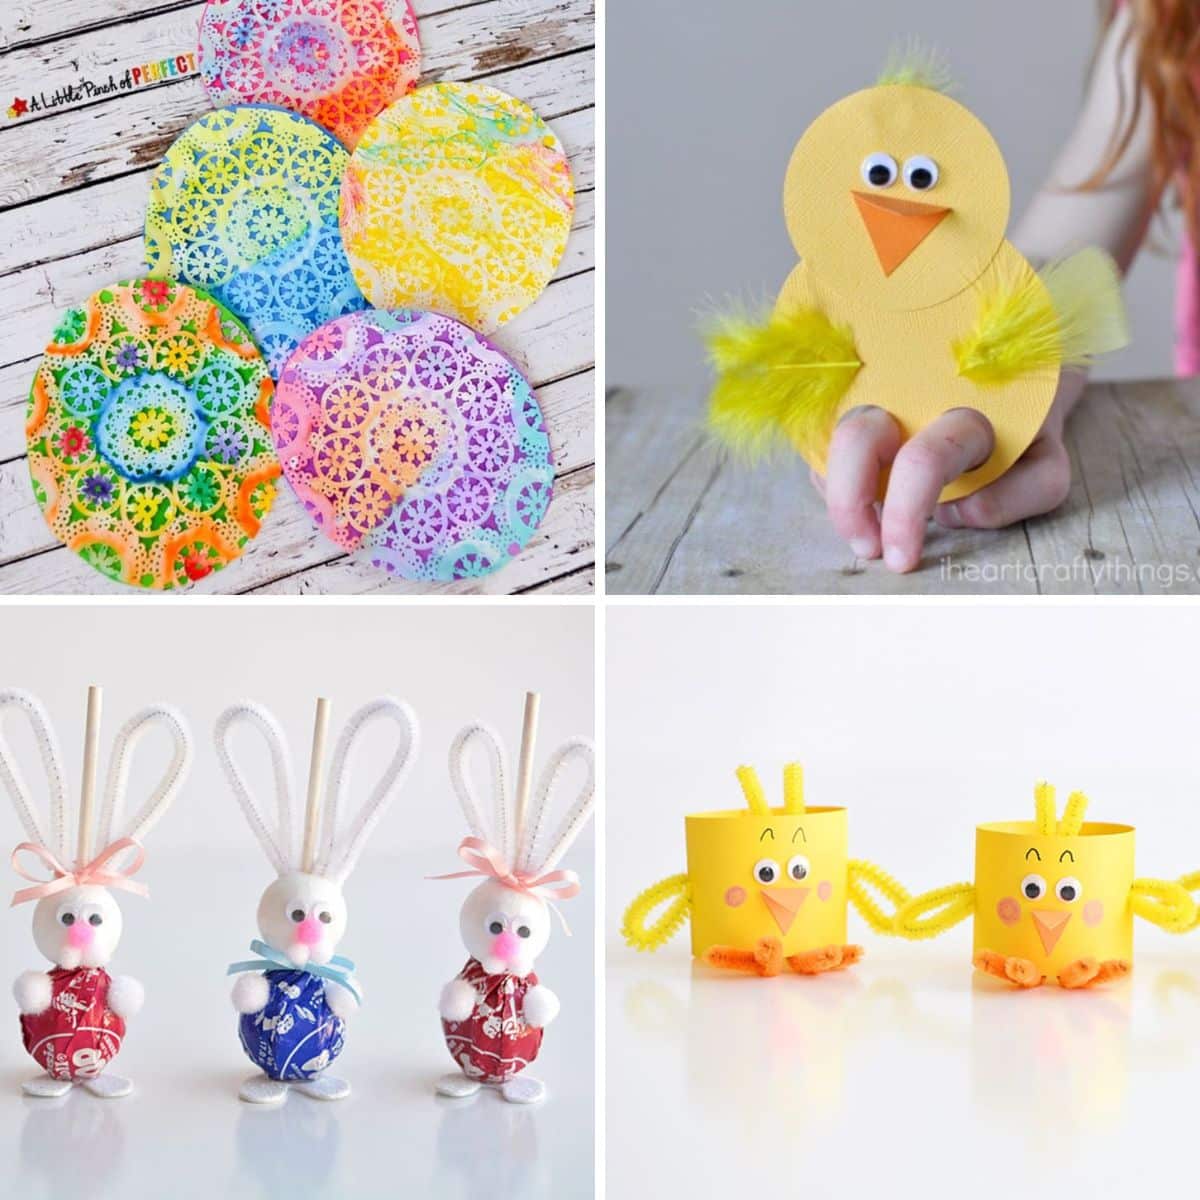 4 images of super cute easter crafts for kids.